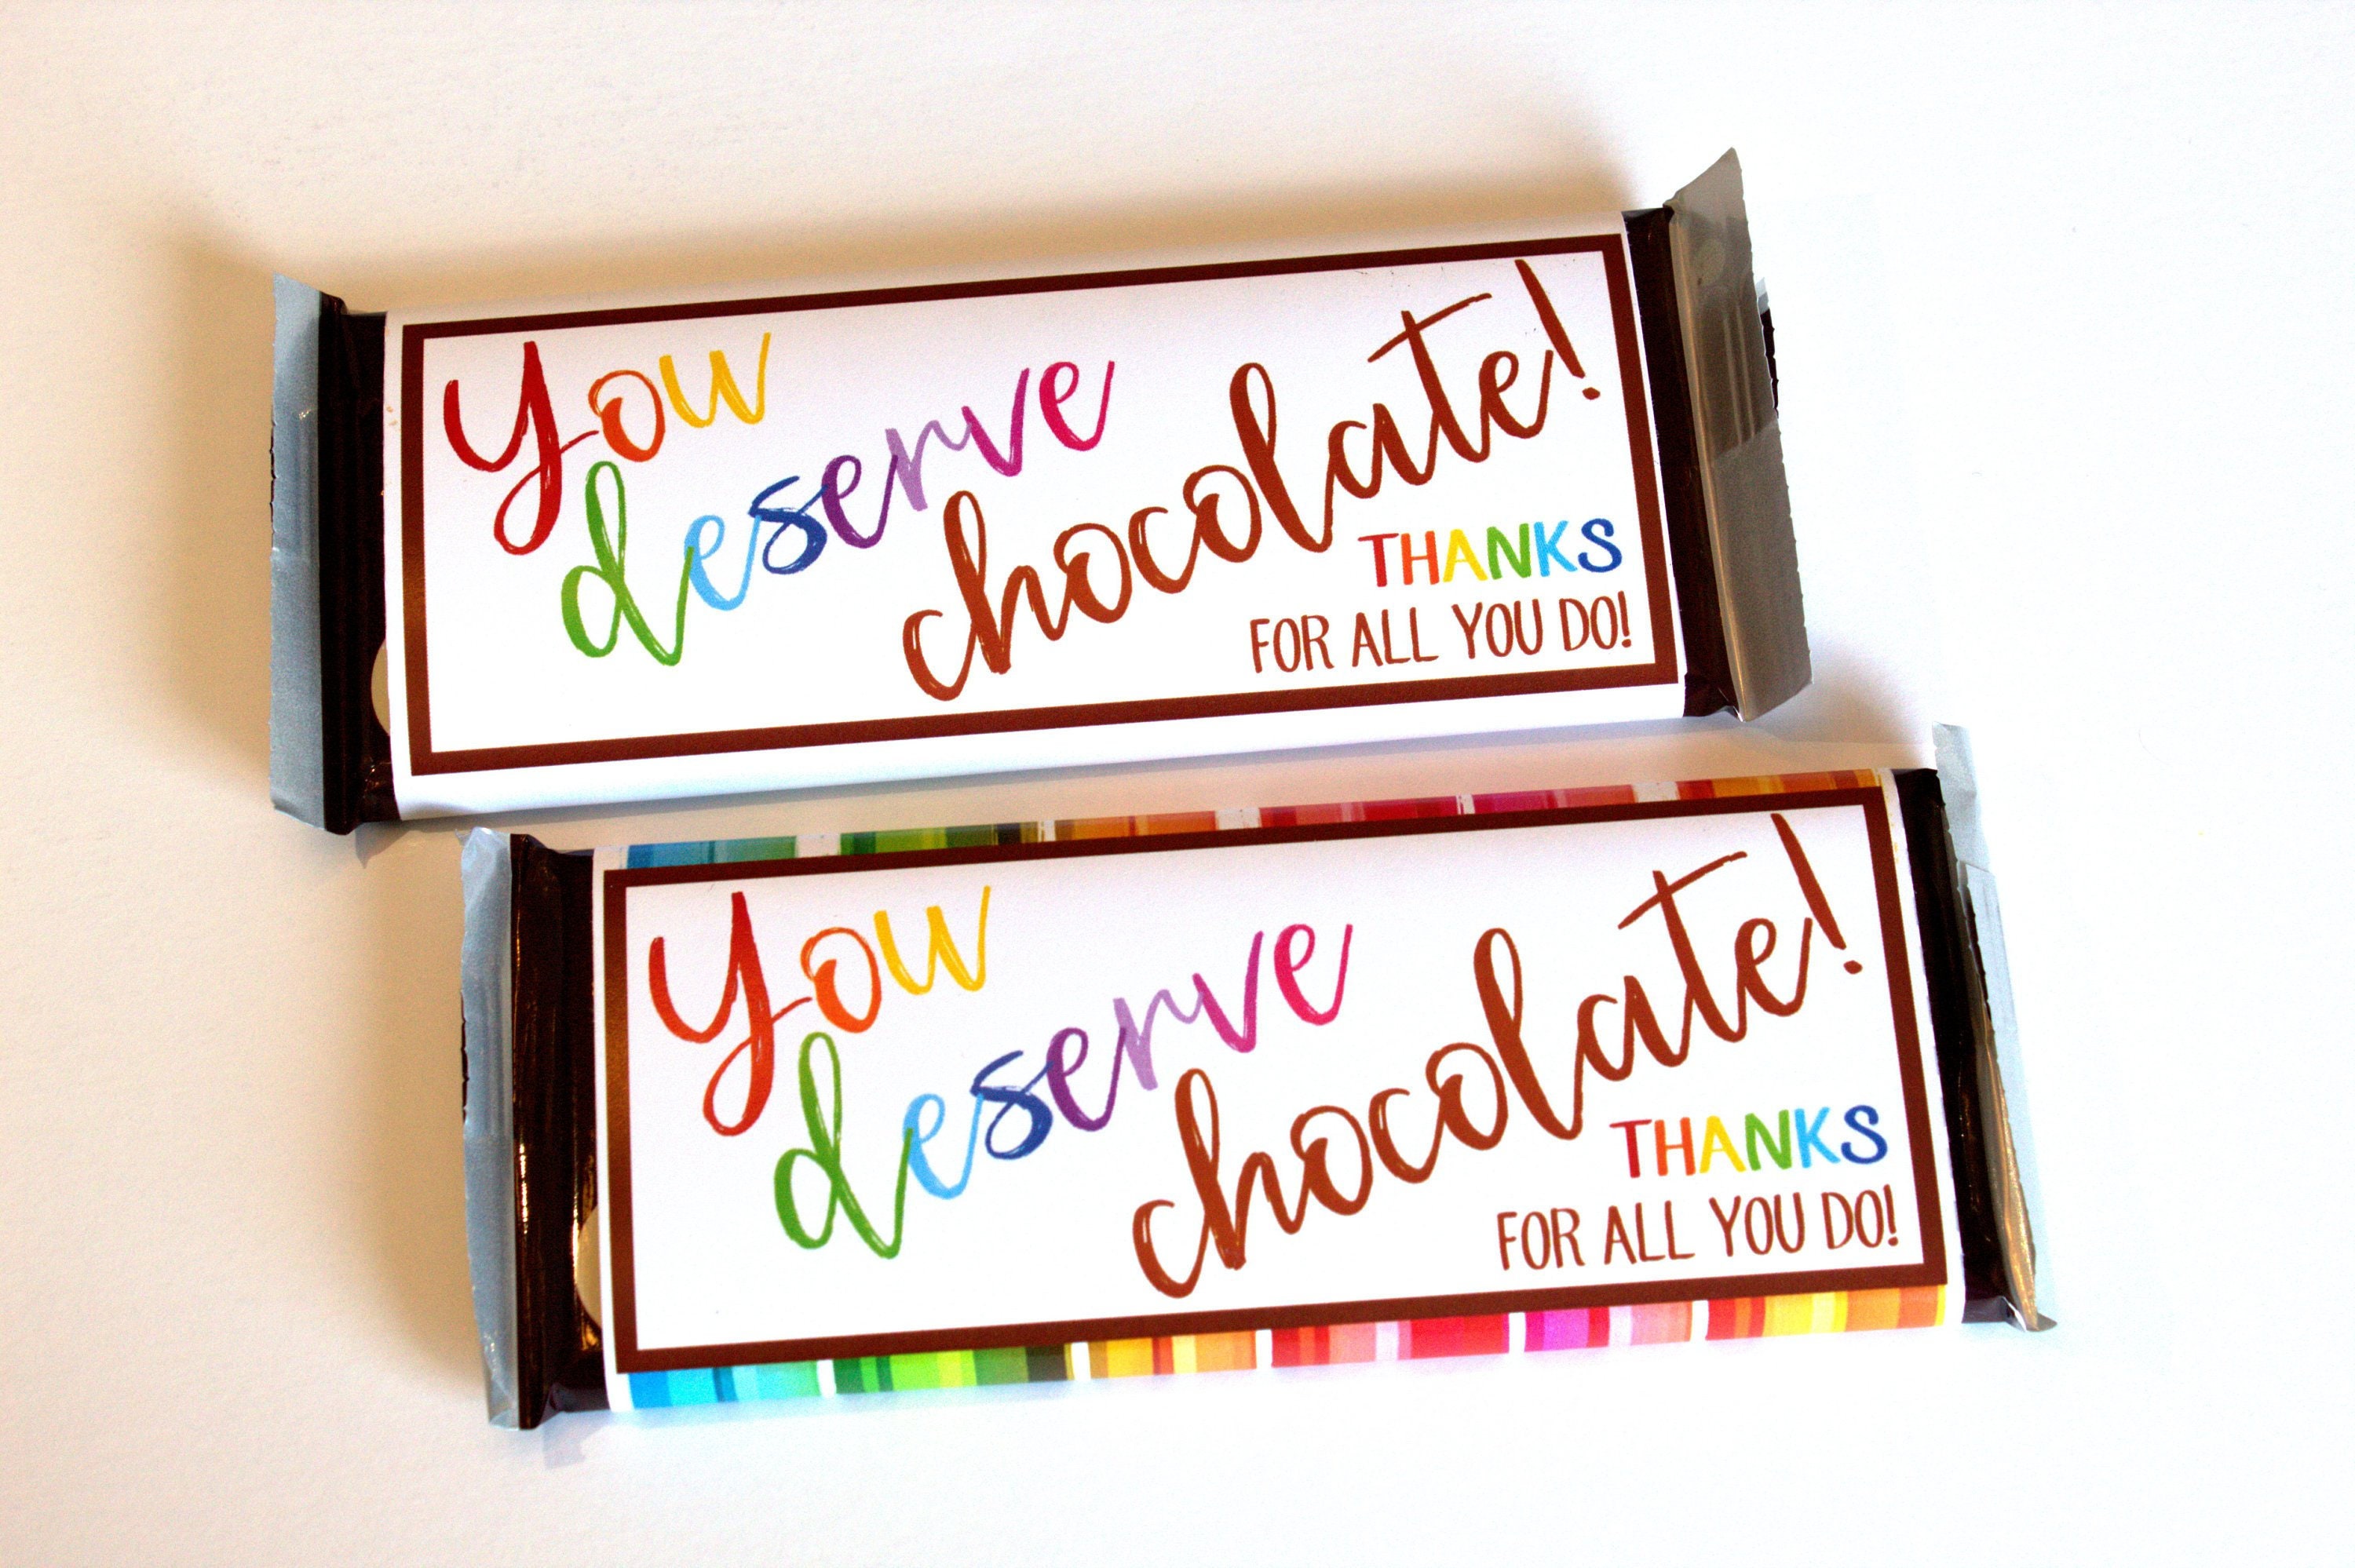 Designer Candy Bar Wrappers - Choose your color!